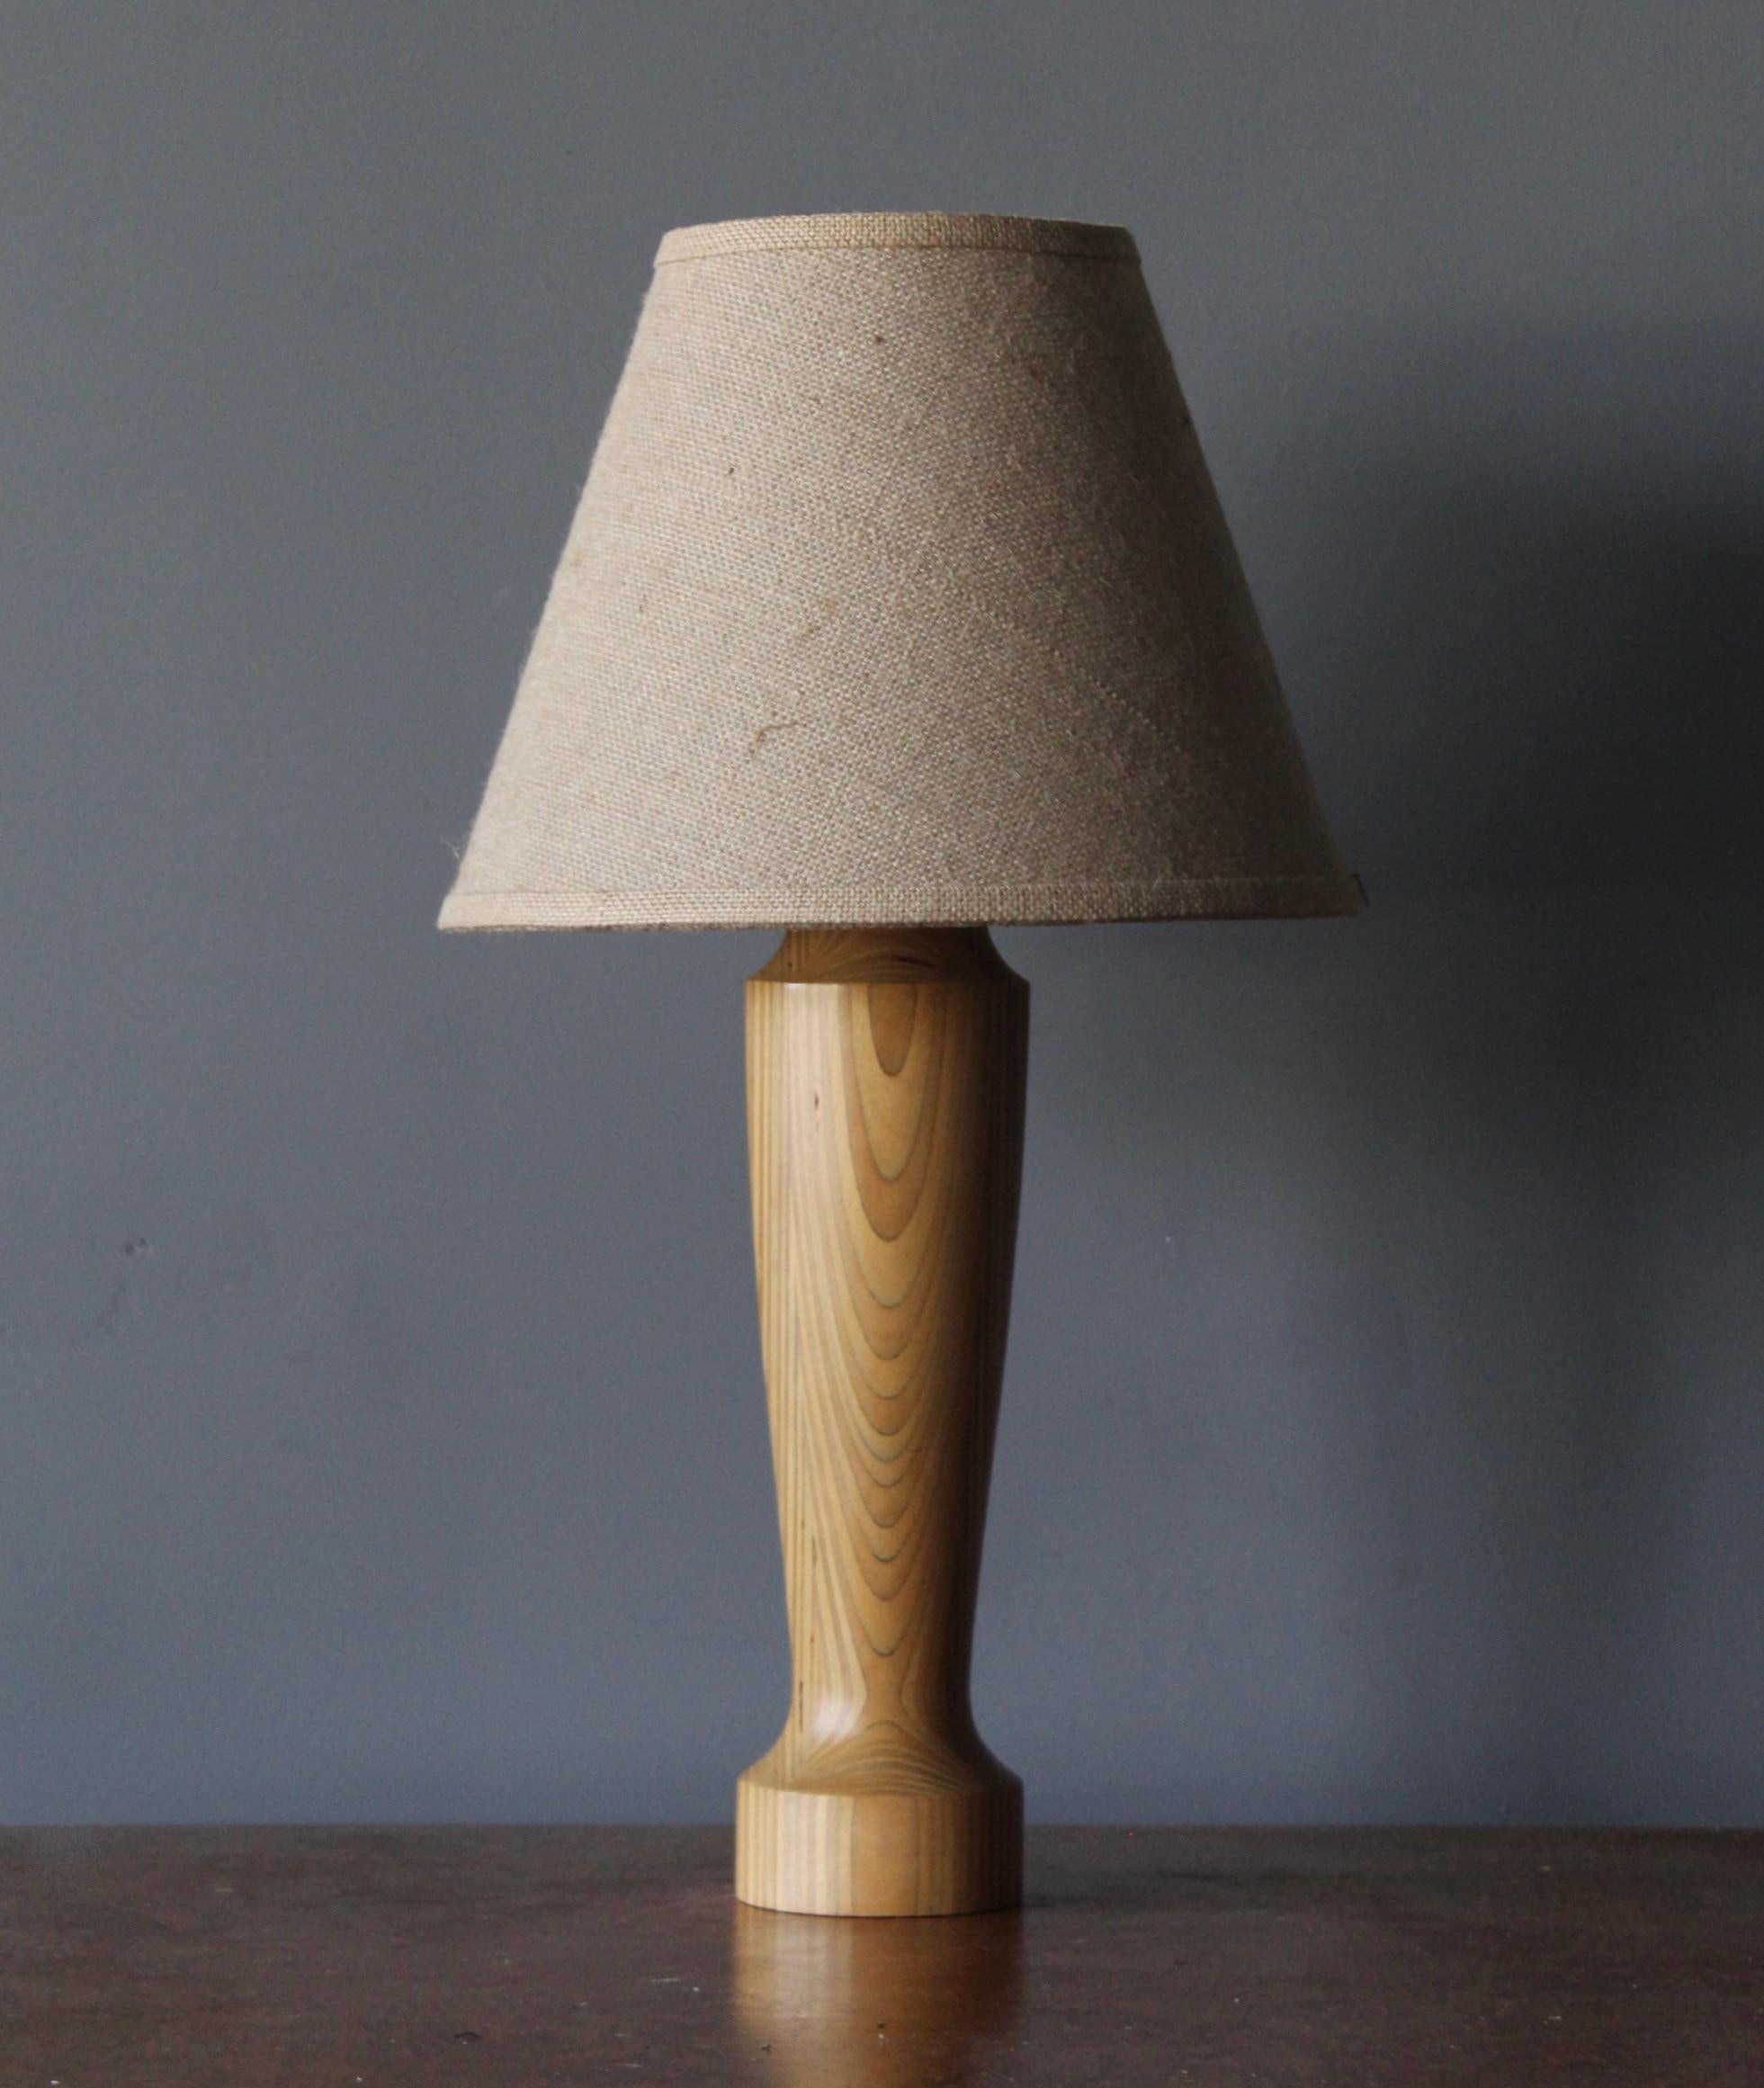 A pair of modernist table lamps. In stack-laminated turned wood with a highly sculptural appeal and beautiful texture. Produced in Sweden by an anonymous creator, 1960s.

Sold without lampshades, dimensions exclude lampshades, height includes